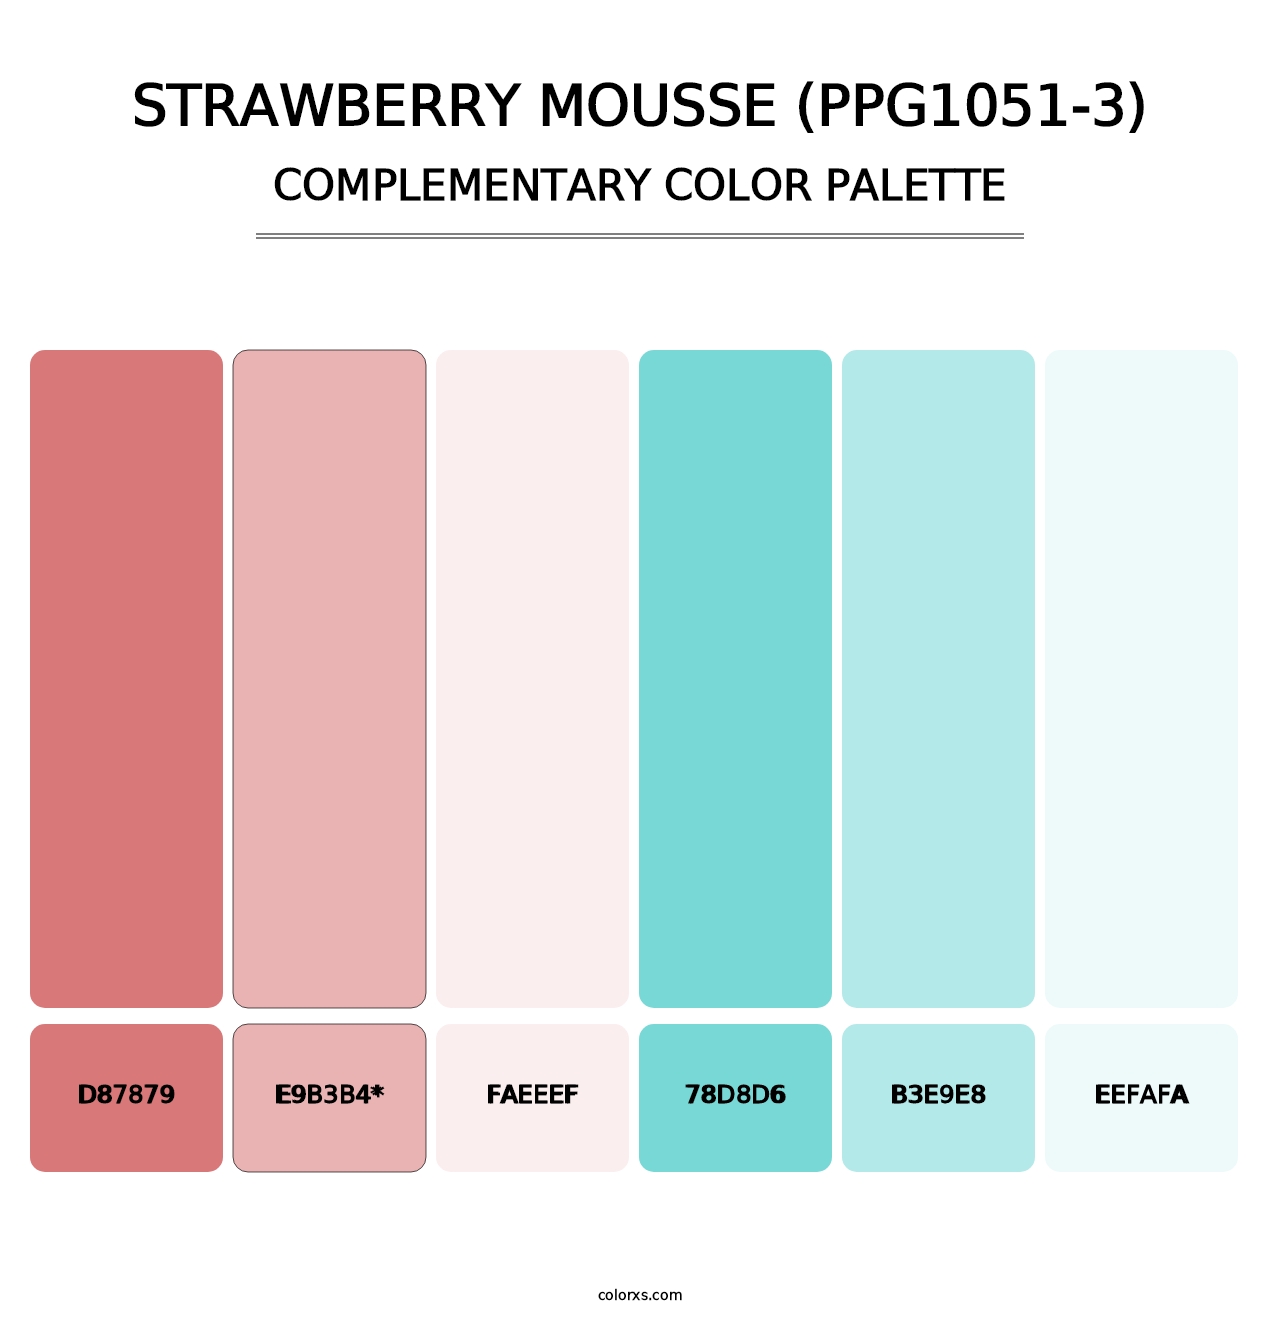 Strawberry Mousse (PPG1051-3) - Complementary Color Palette